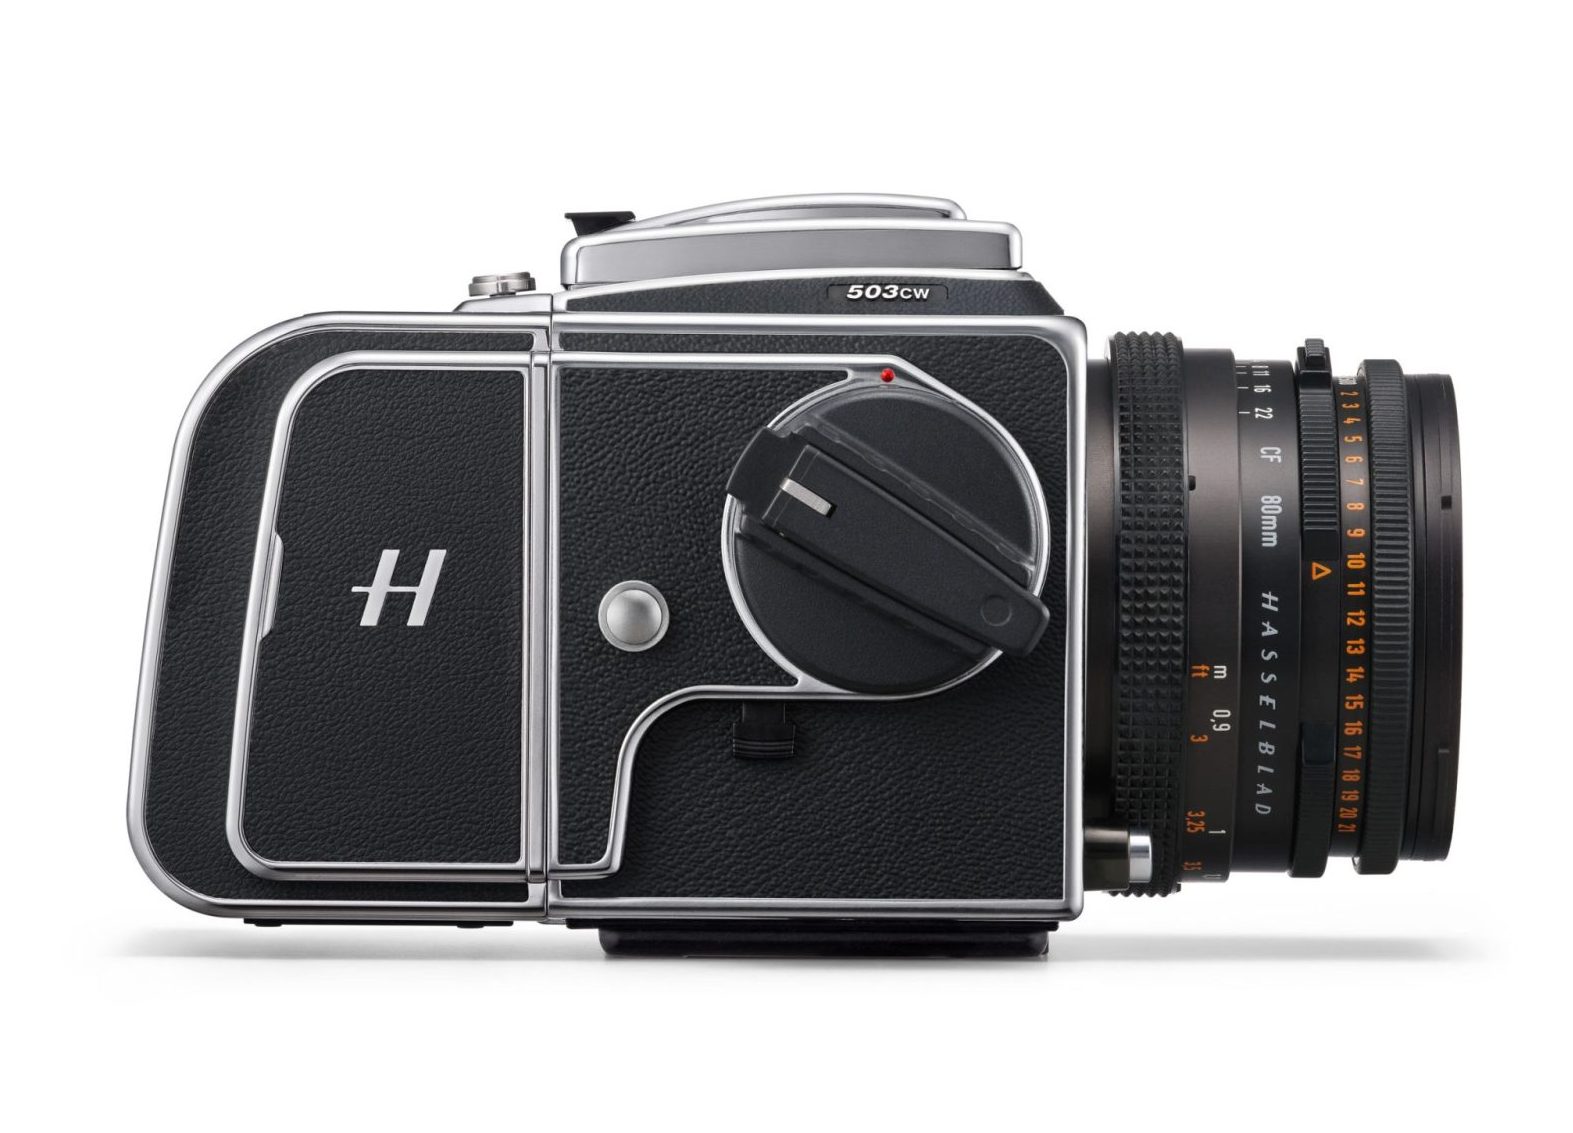 hasselblad-907x-100c-on-white - side on 507cw